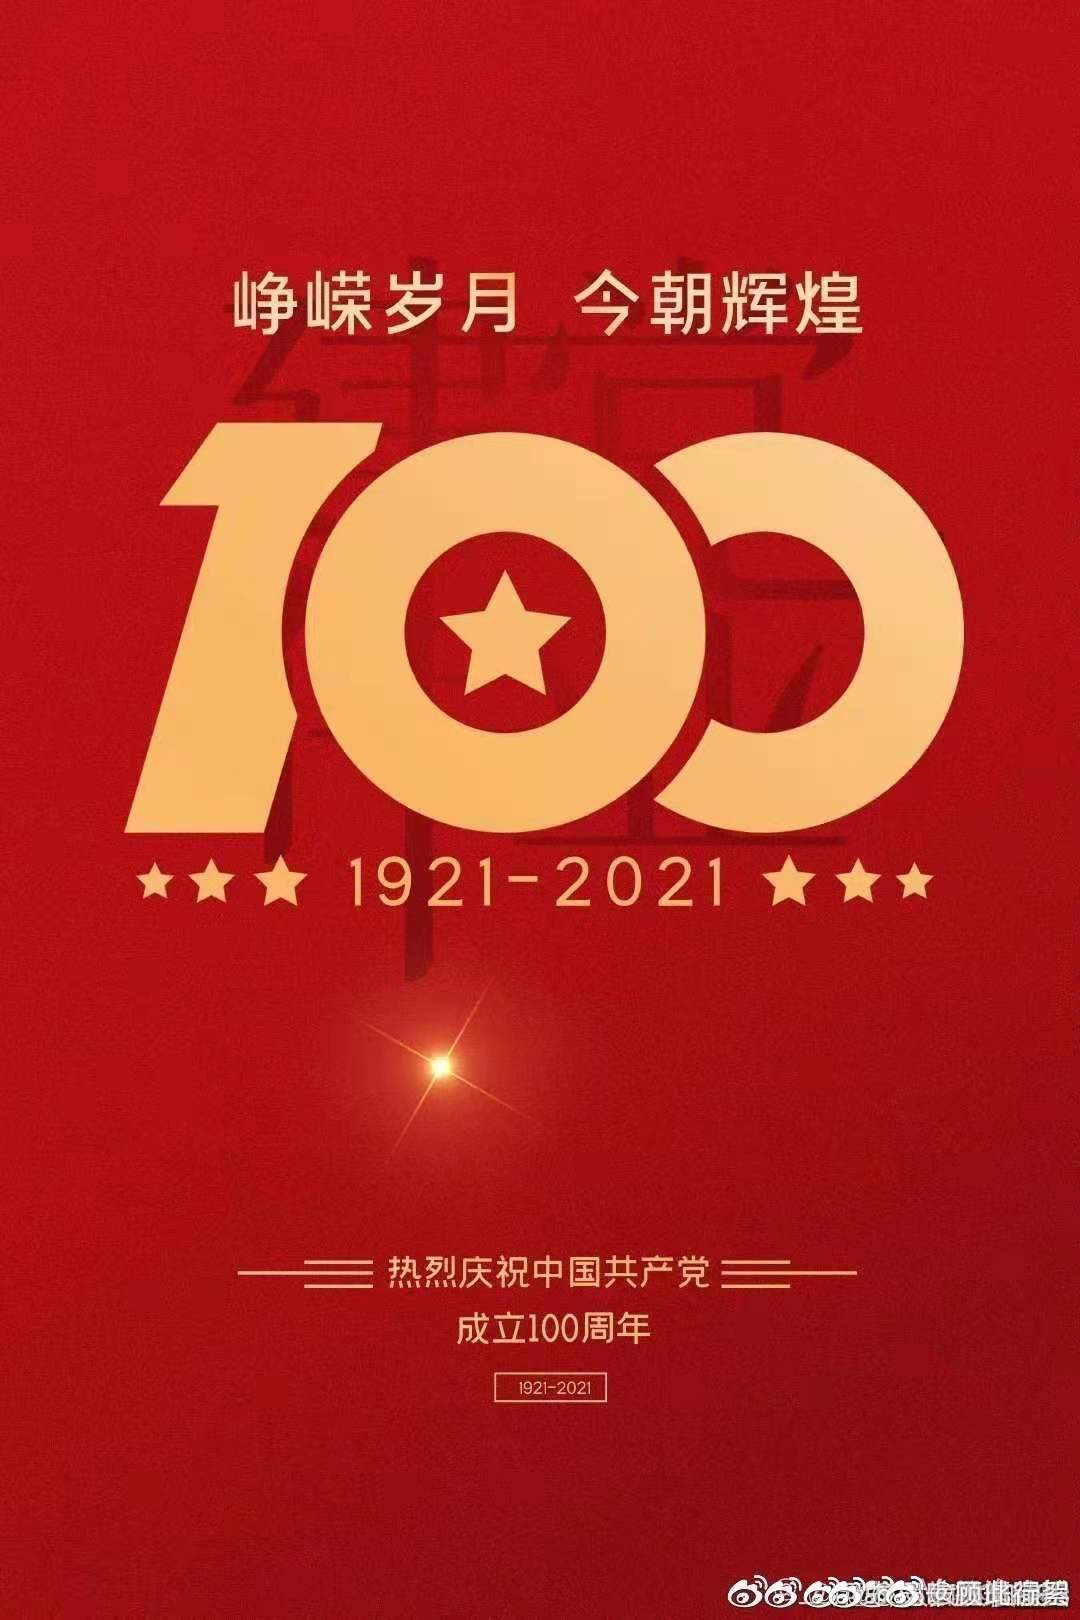 Speech at a Ceremony Marking the Centenary of the Communist Party of China